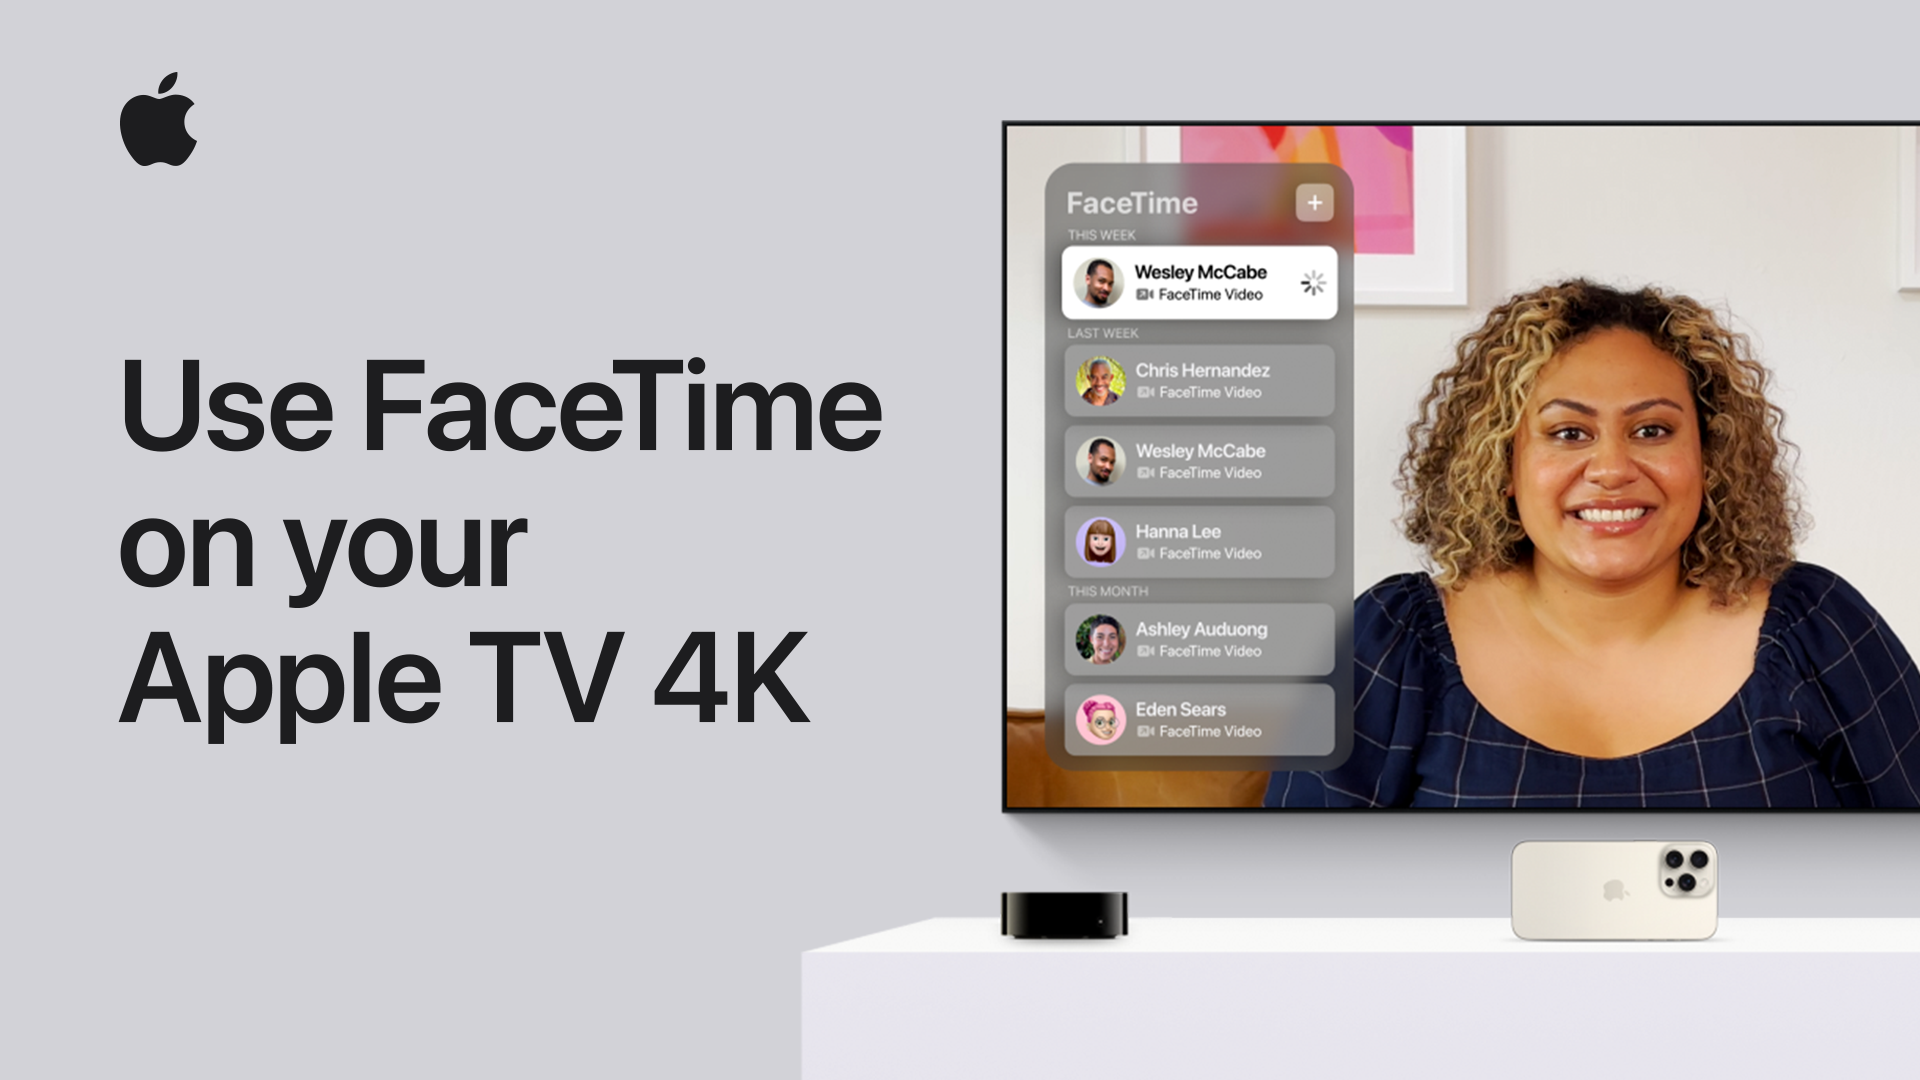 Use FaceTime and Continuity Camera